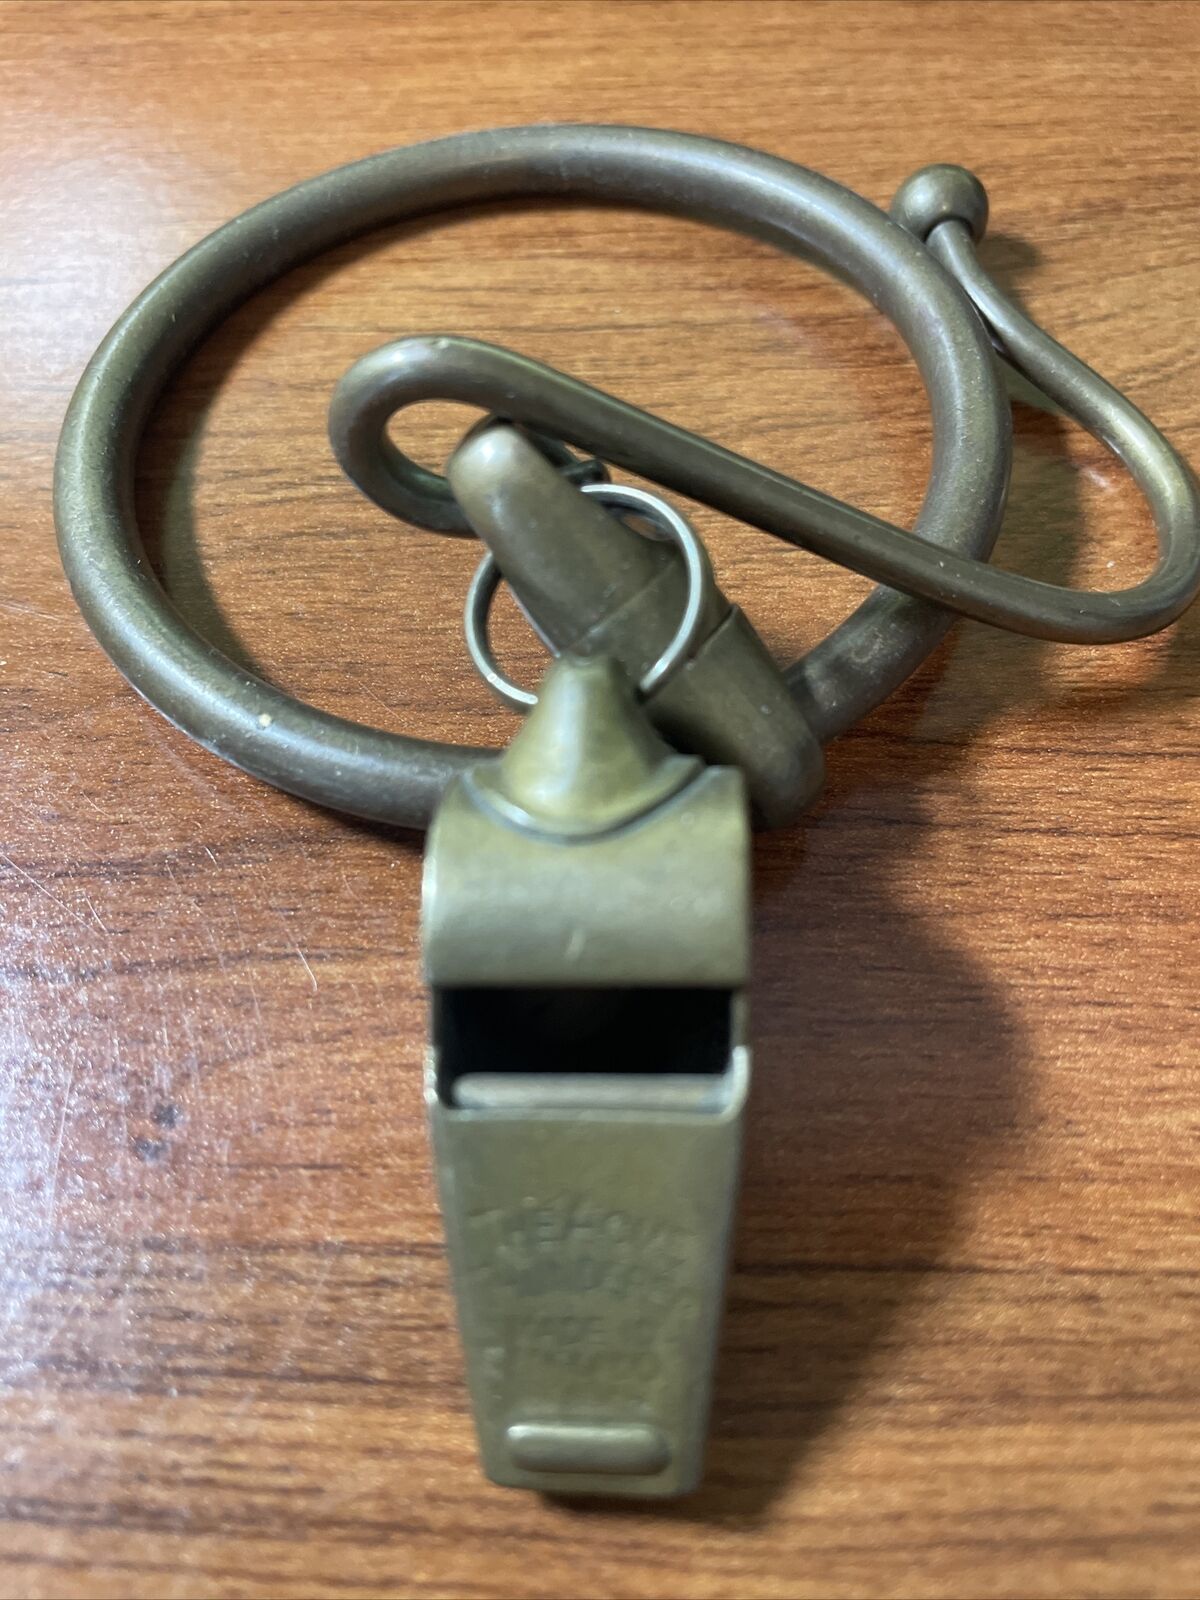 Vintage The Acme Thunderer Brass Whistle Made In England Gemsco, police whistle